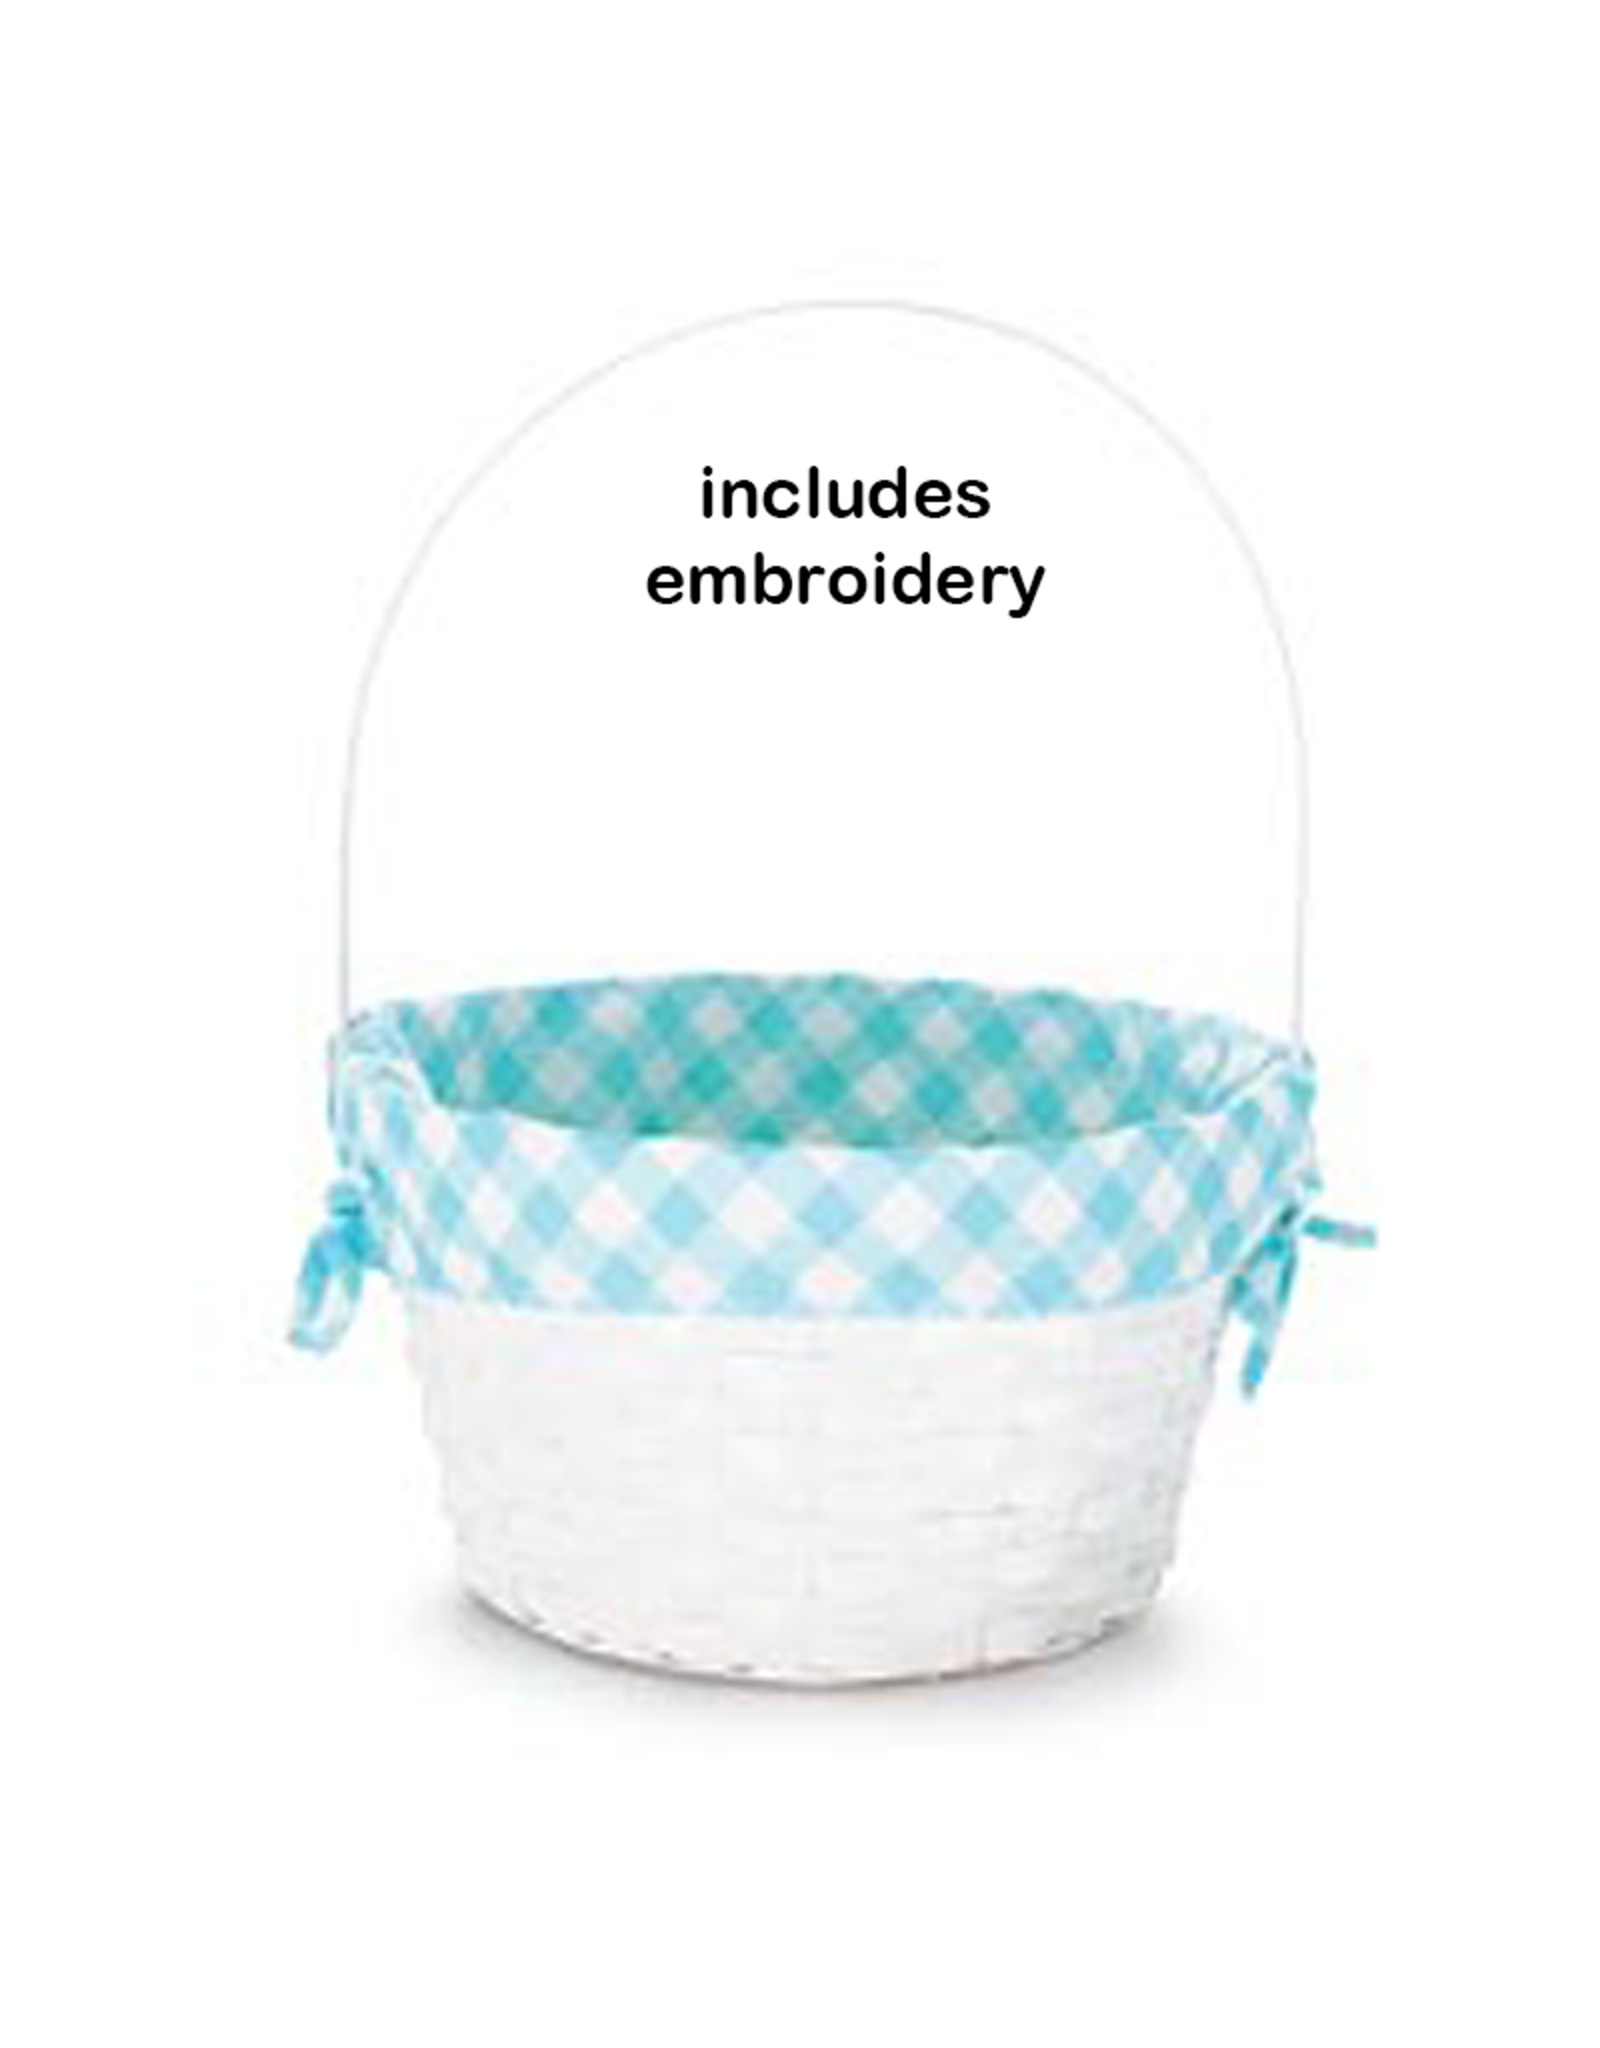 Burton & Burton Lined Easter Basket w/ Embroidery Mint Green Gingham